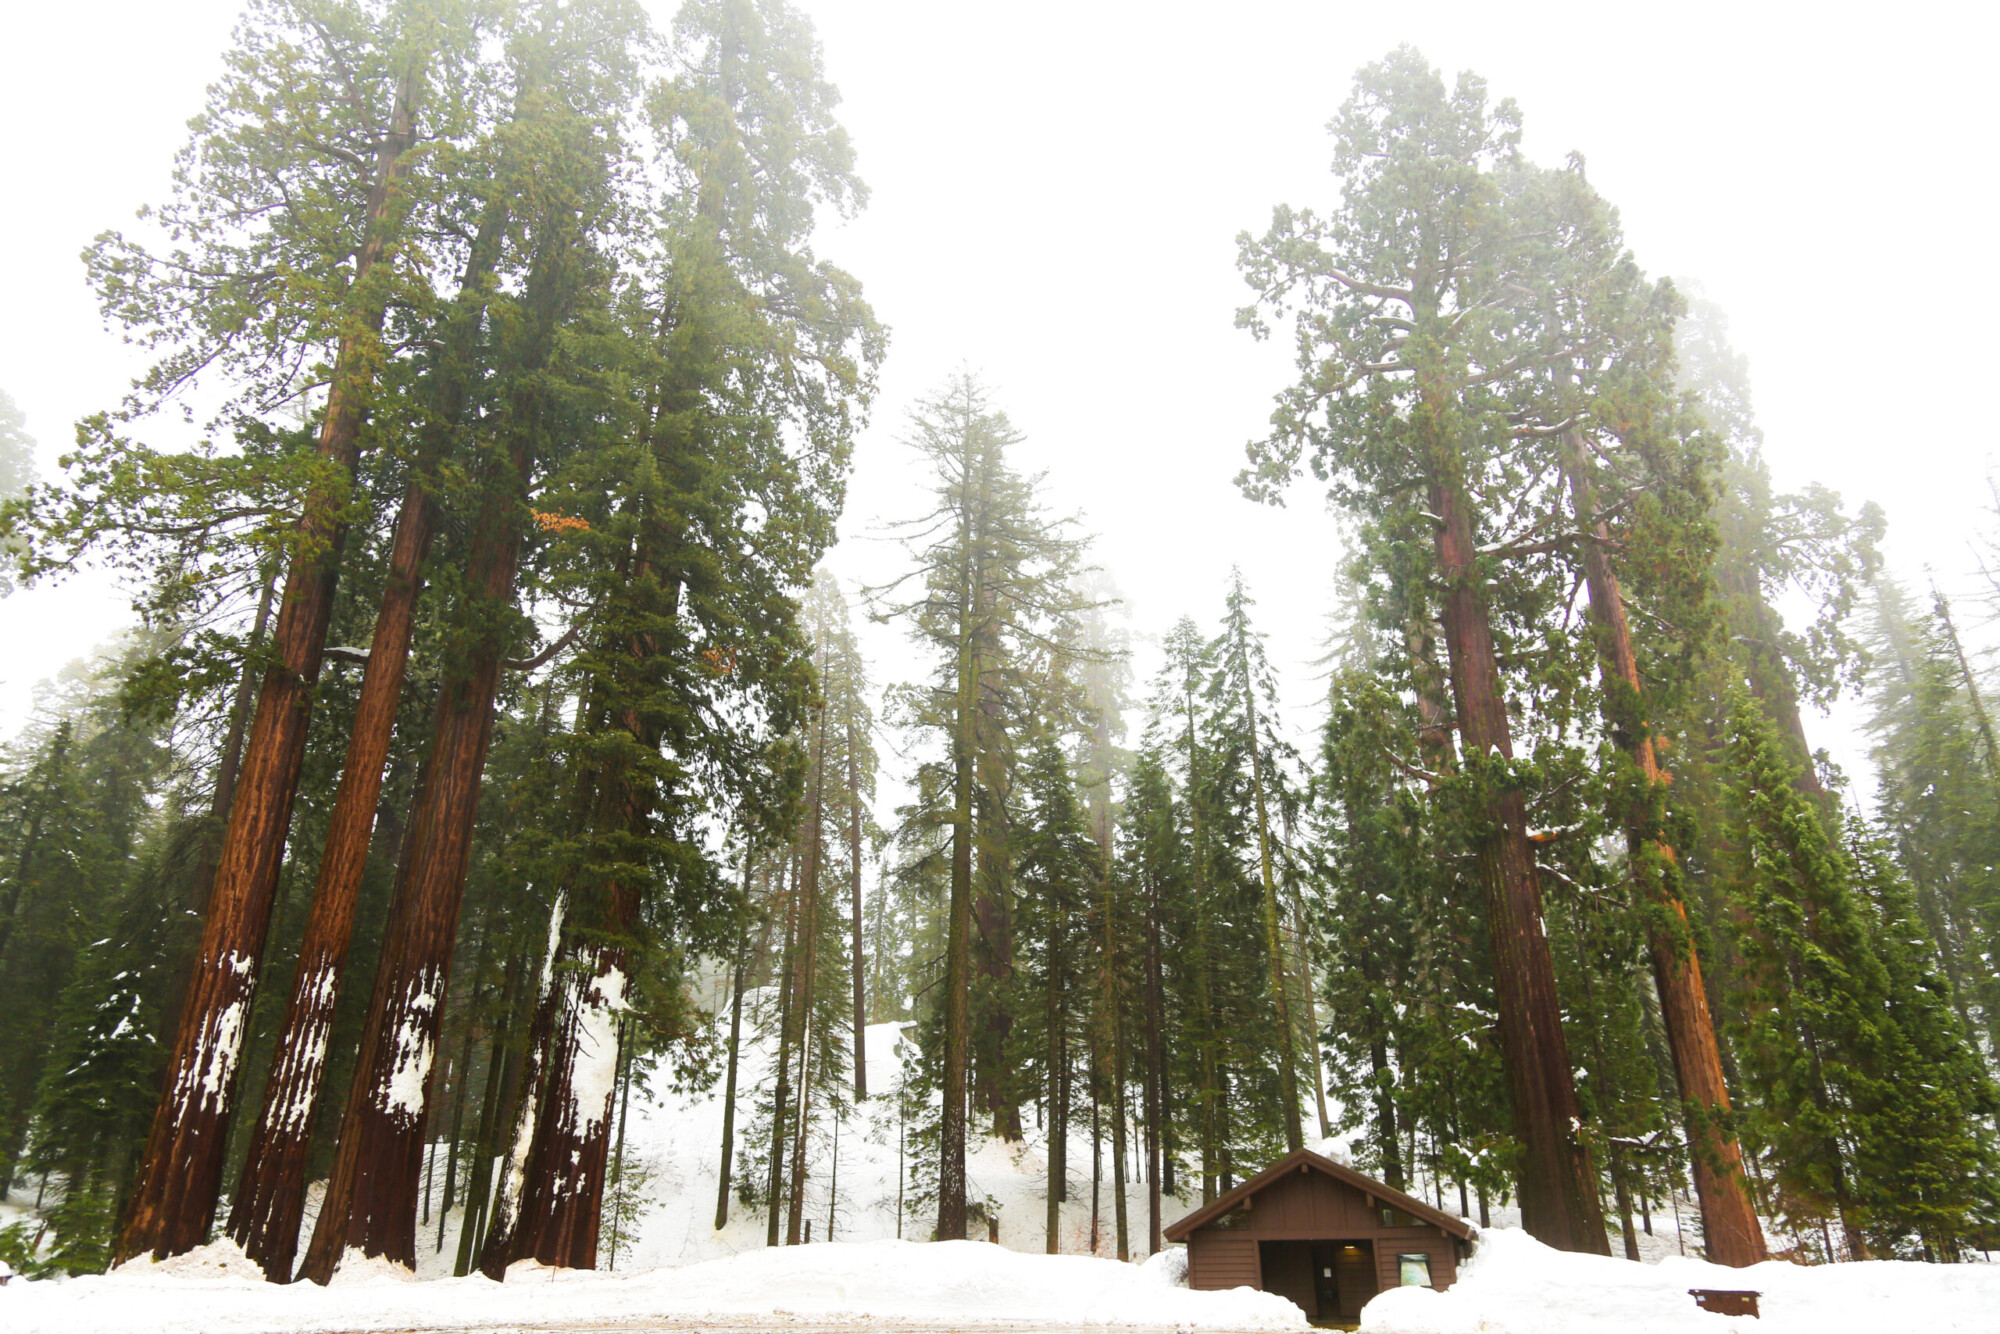 Winter scene of a small building and sequoia trees blanketed in snow in Sequoia National Forest.